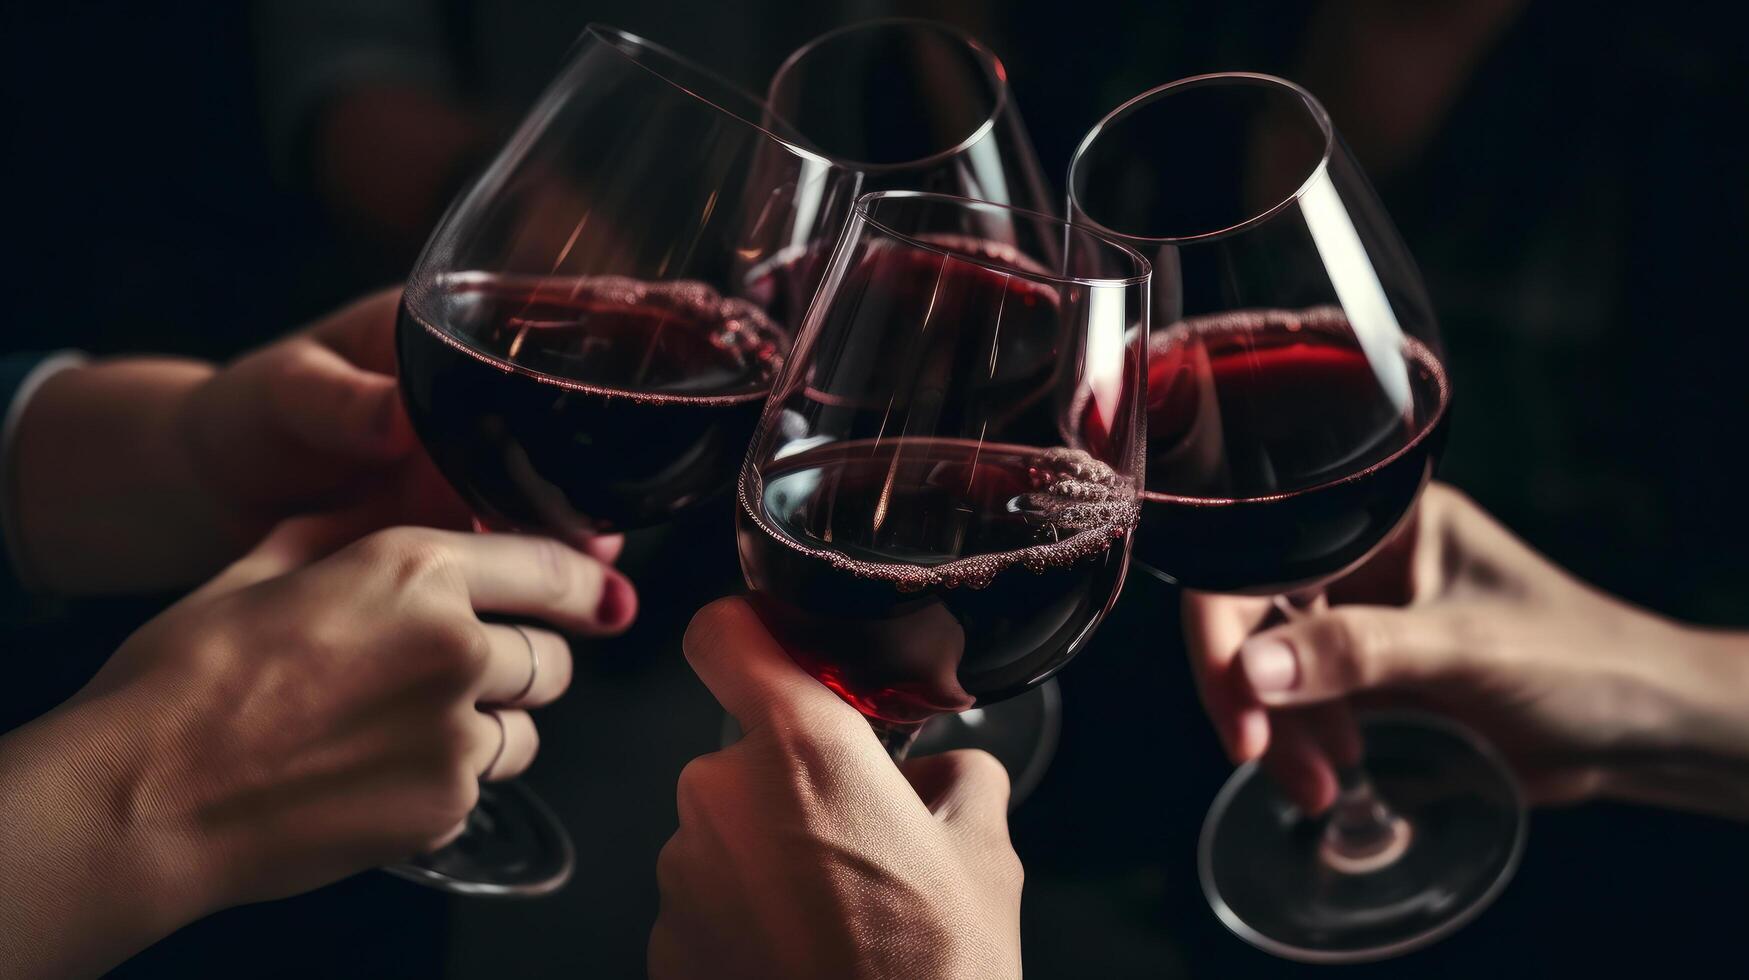 People's hands are minted with glasses of wine Illustration photo